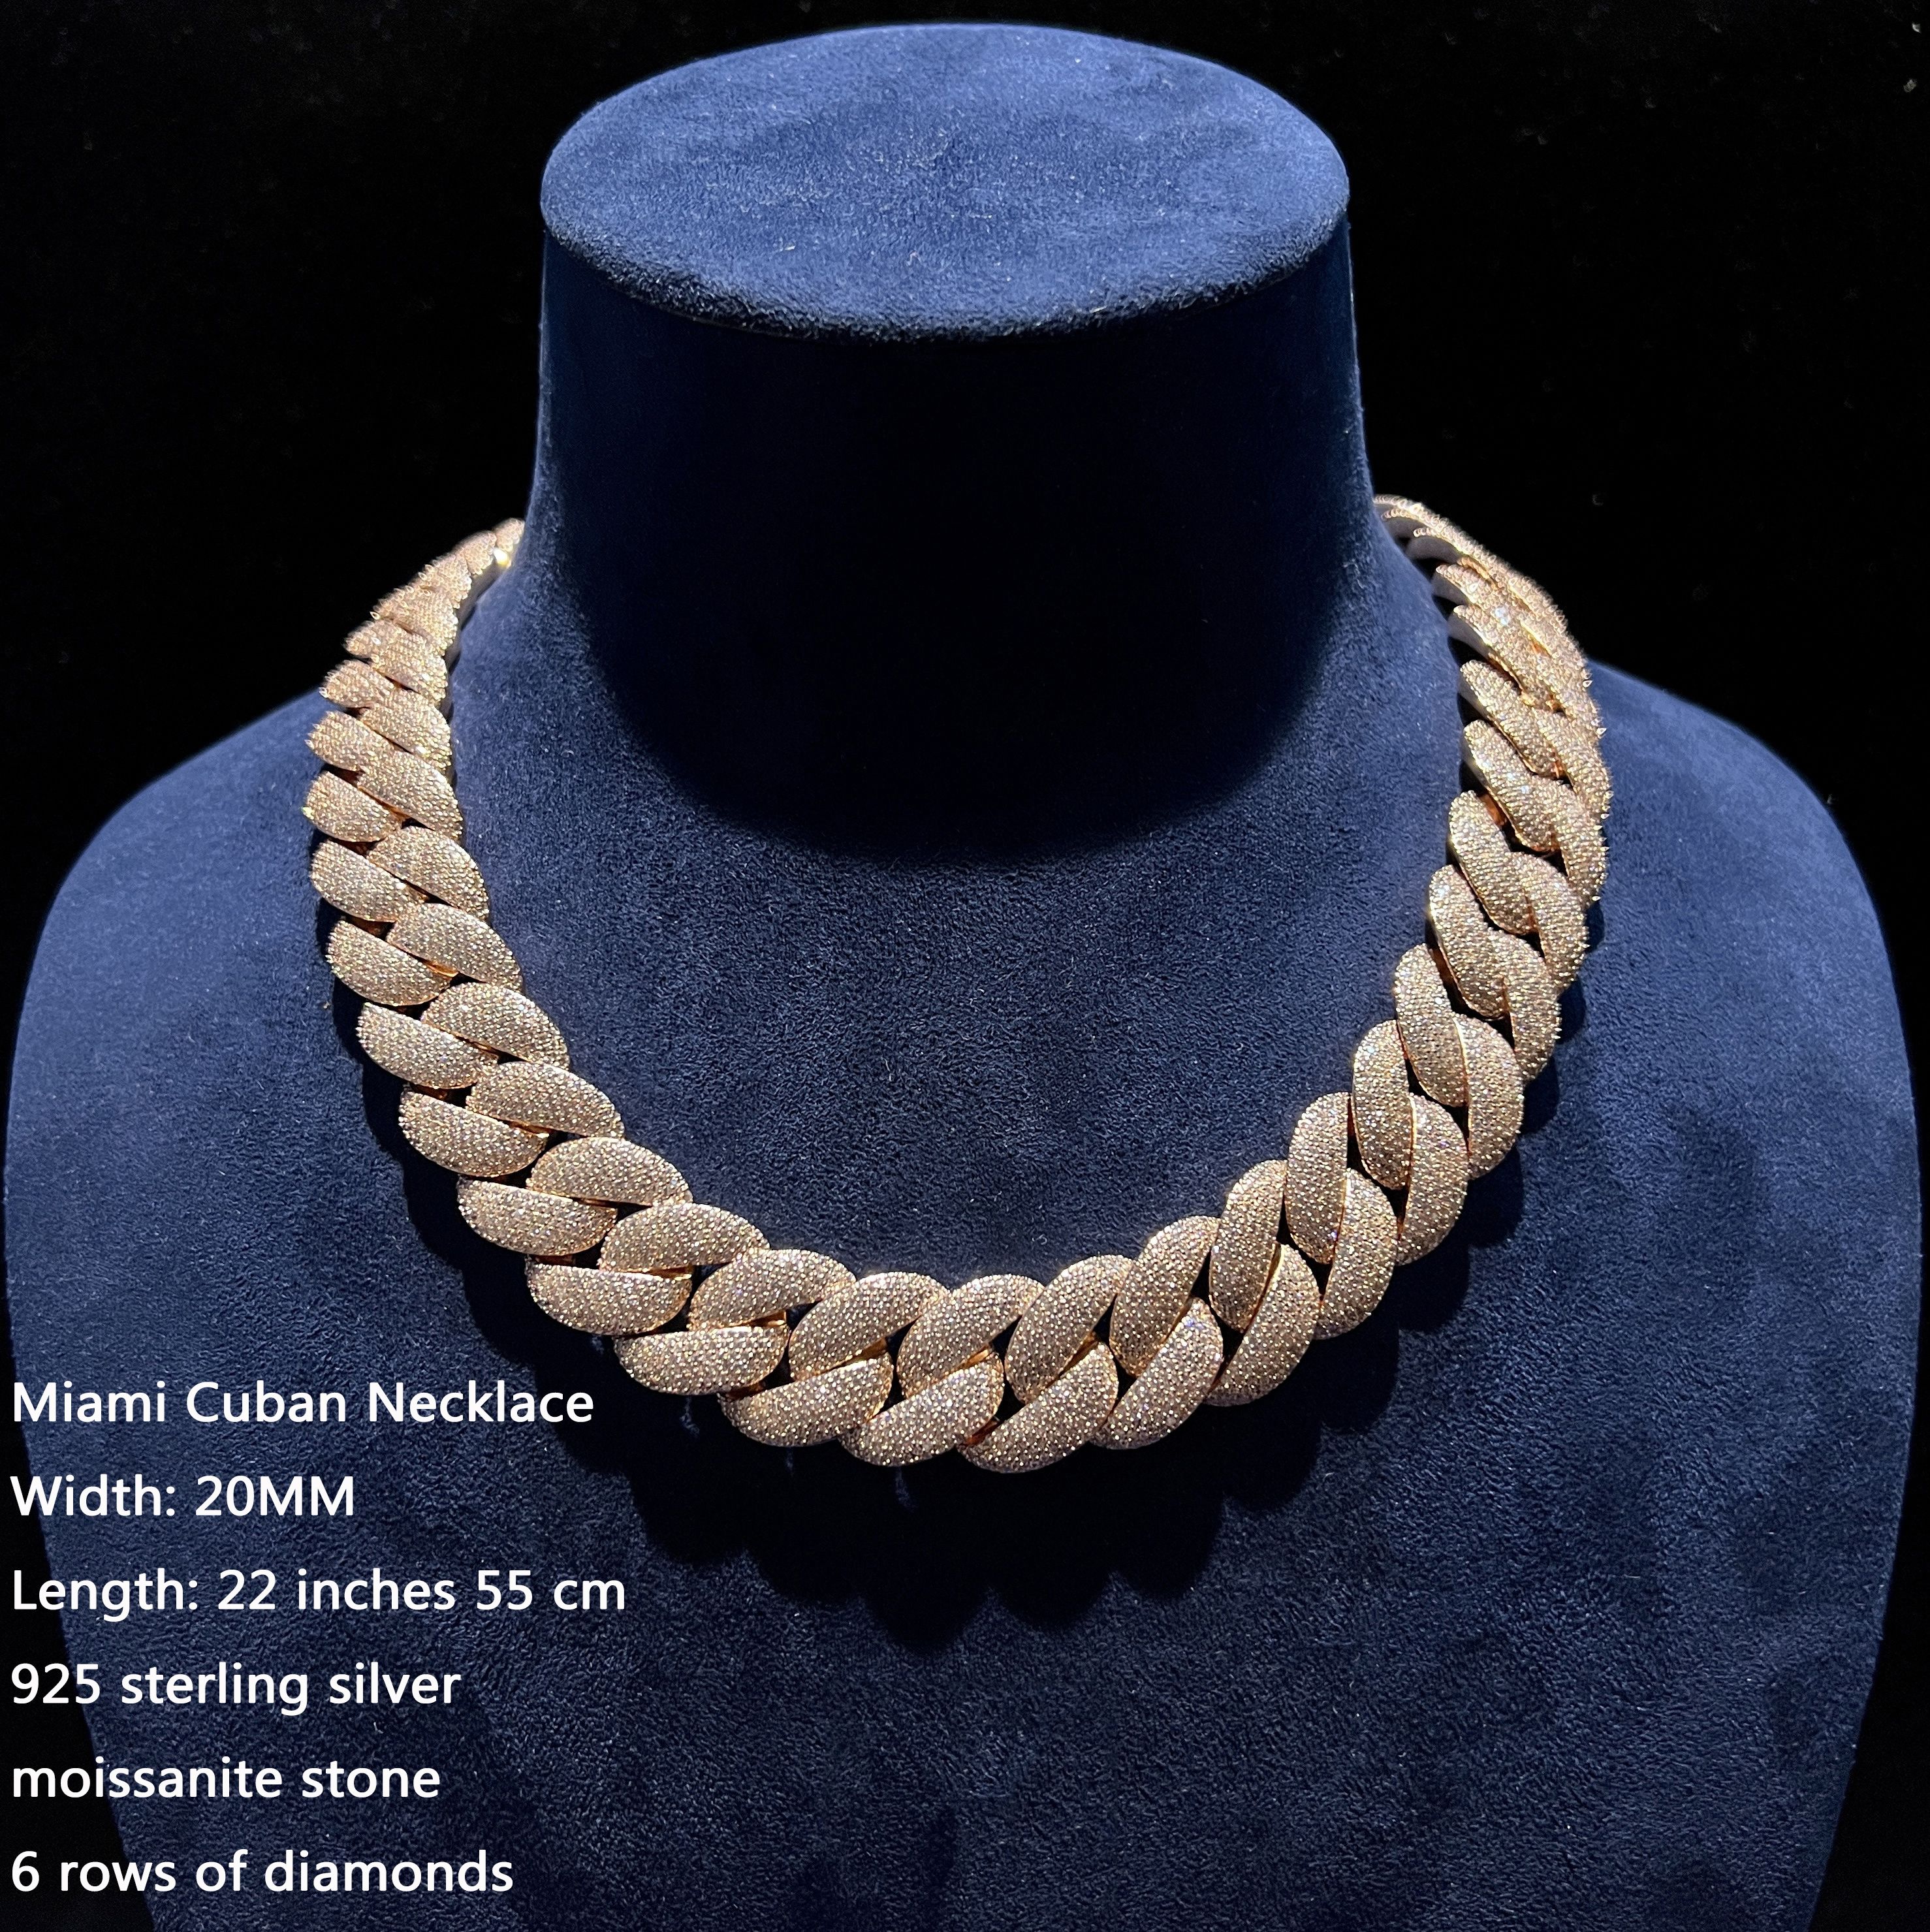 20mm necklace22 inches55cm